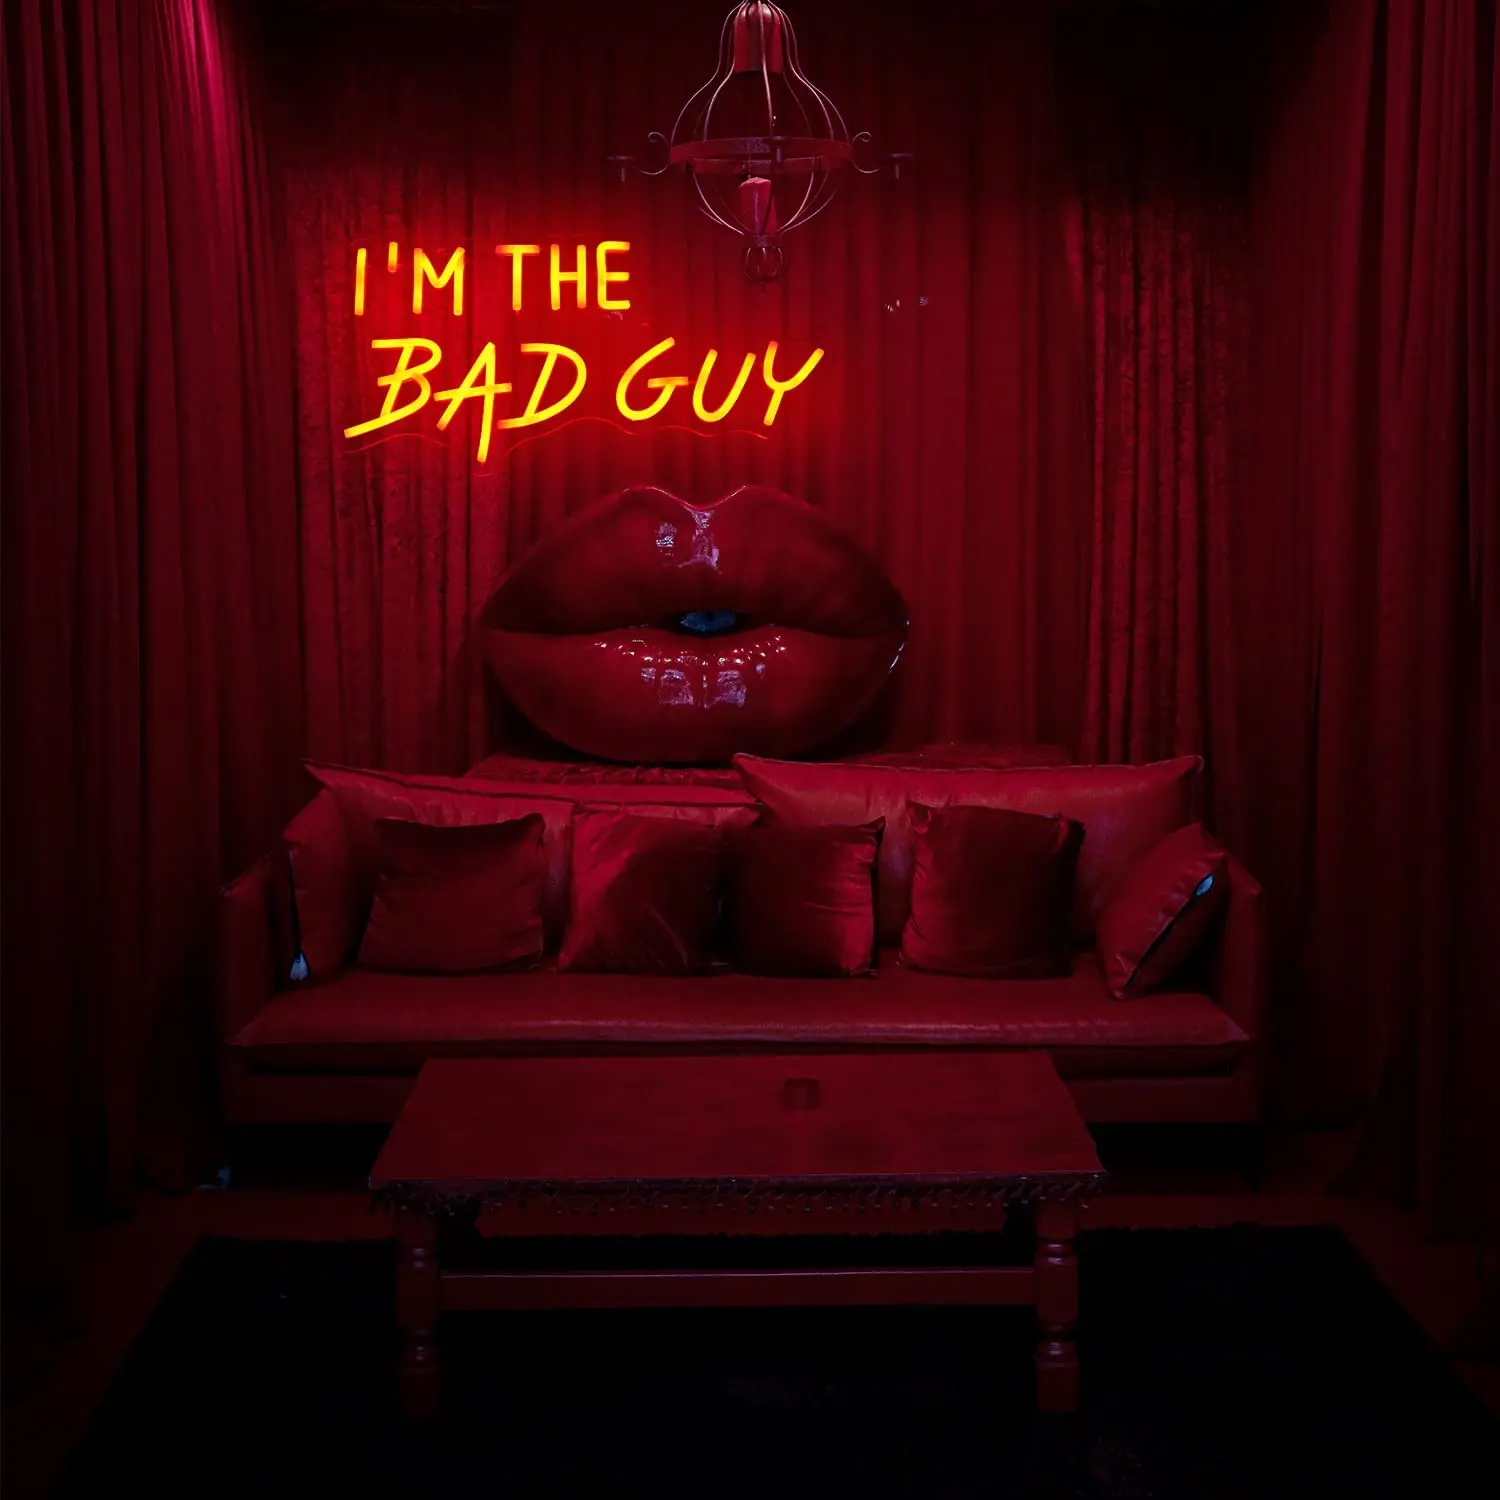 I'm the Bad Guy Neon Sign Red LED Neon Lights Signs Light Up Sign Neon Signs for Wall Bedroom Man Cave Bar Party Game Room Decor images - 6